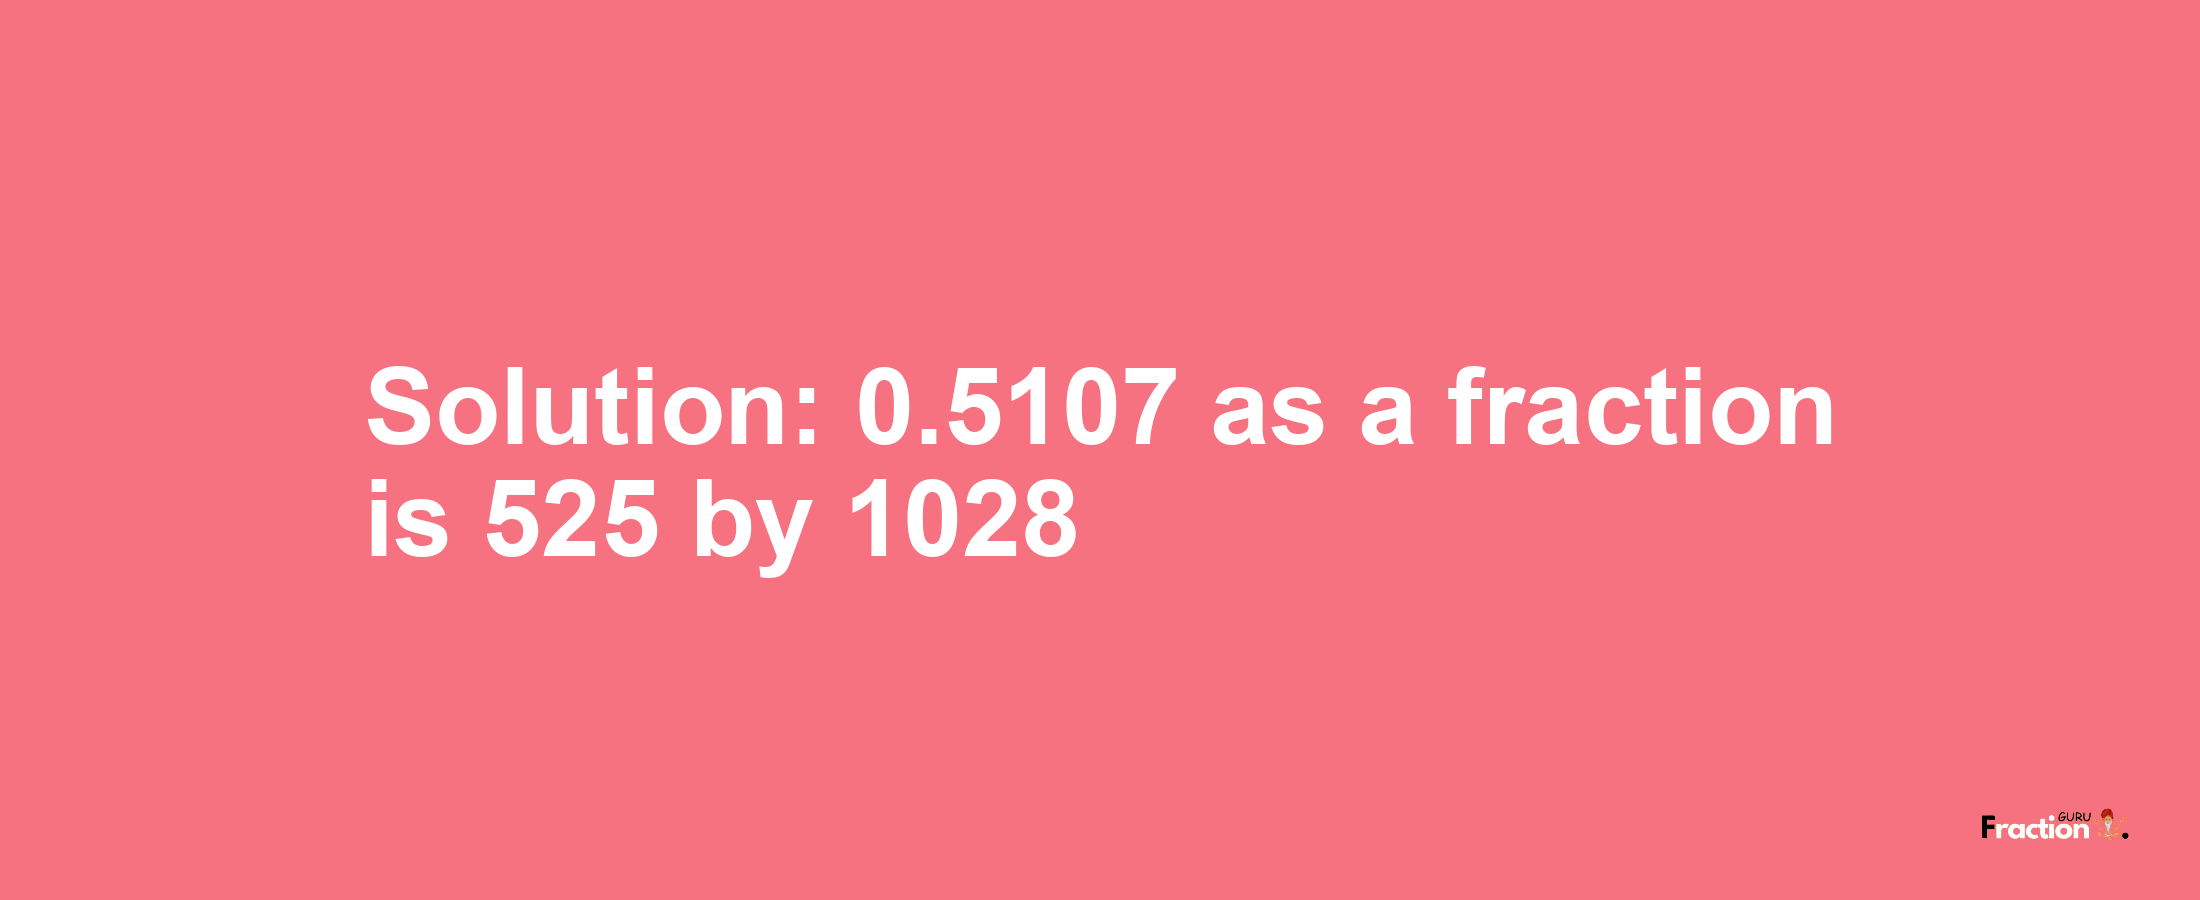 Solution:0.5107 as a fraction is 525/1028